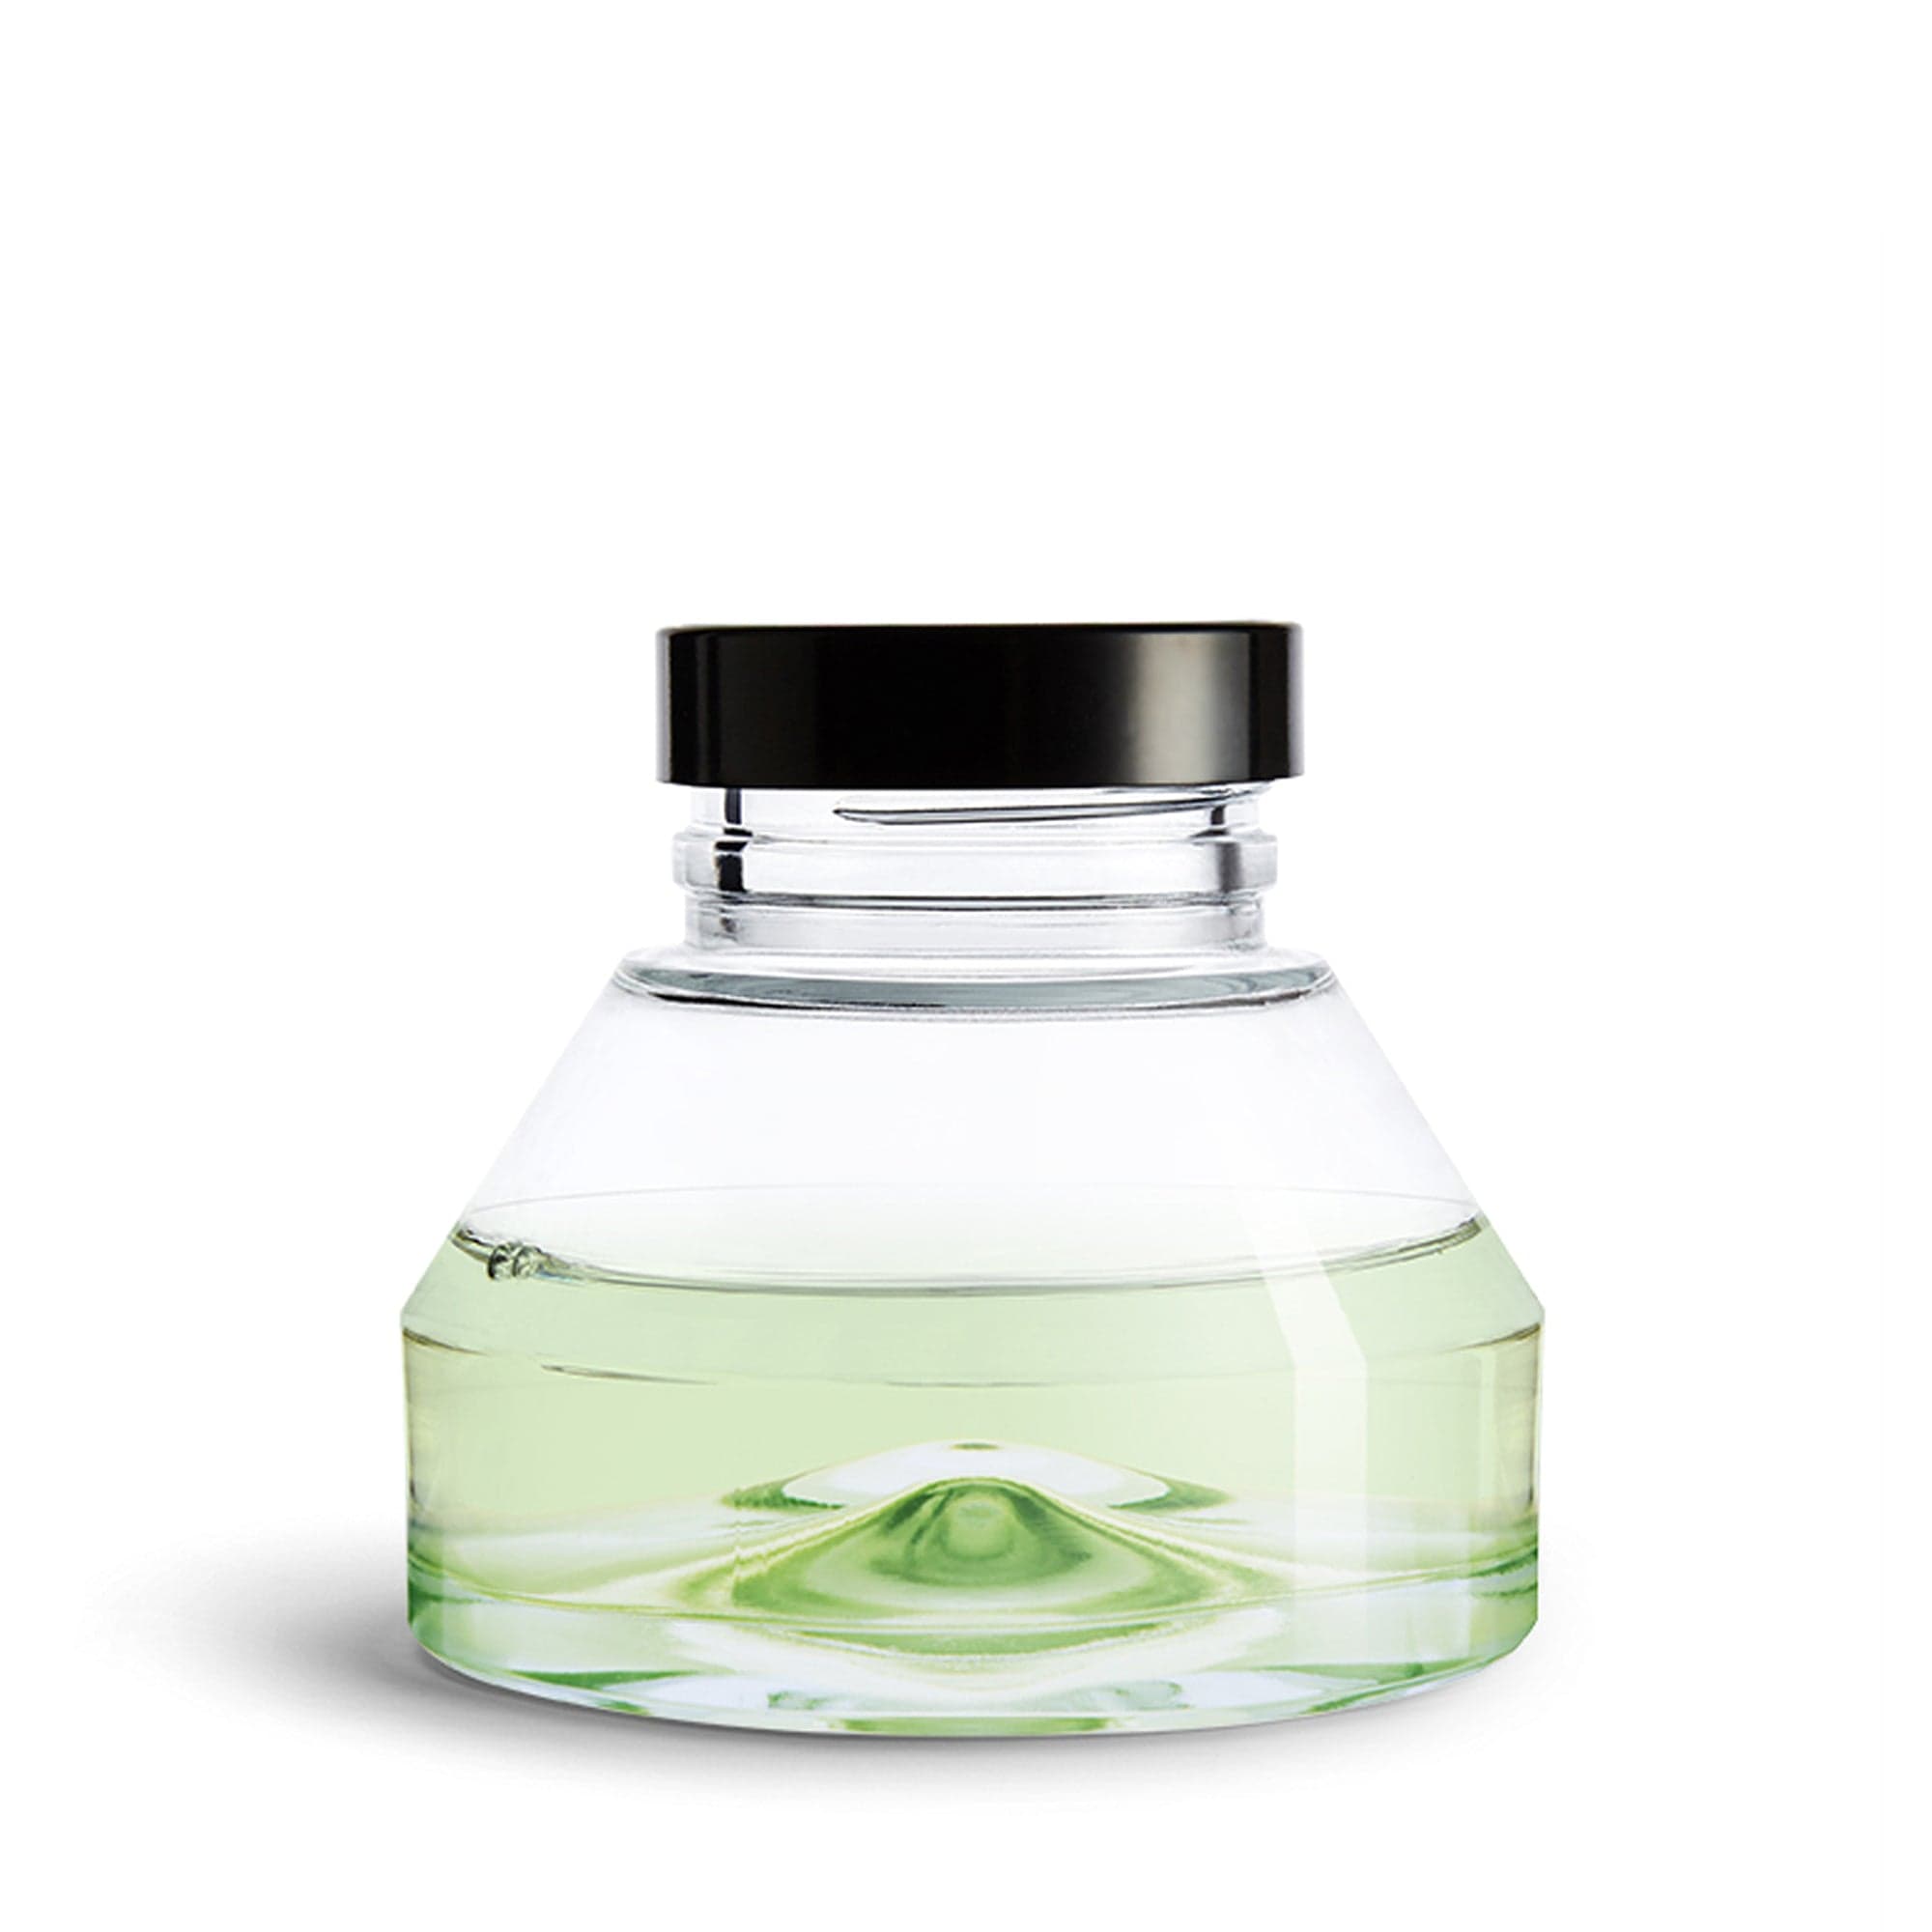 Hourglass 2 diffuser.0 Figuier Diptyque Home diffuser